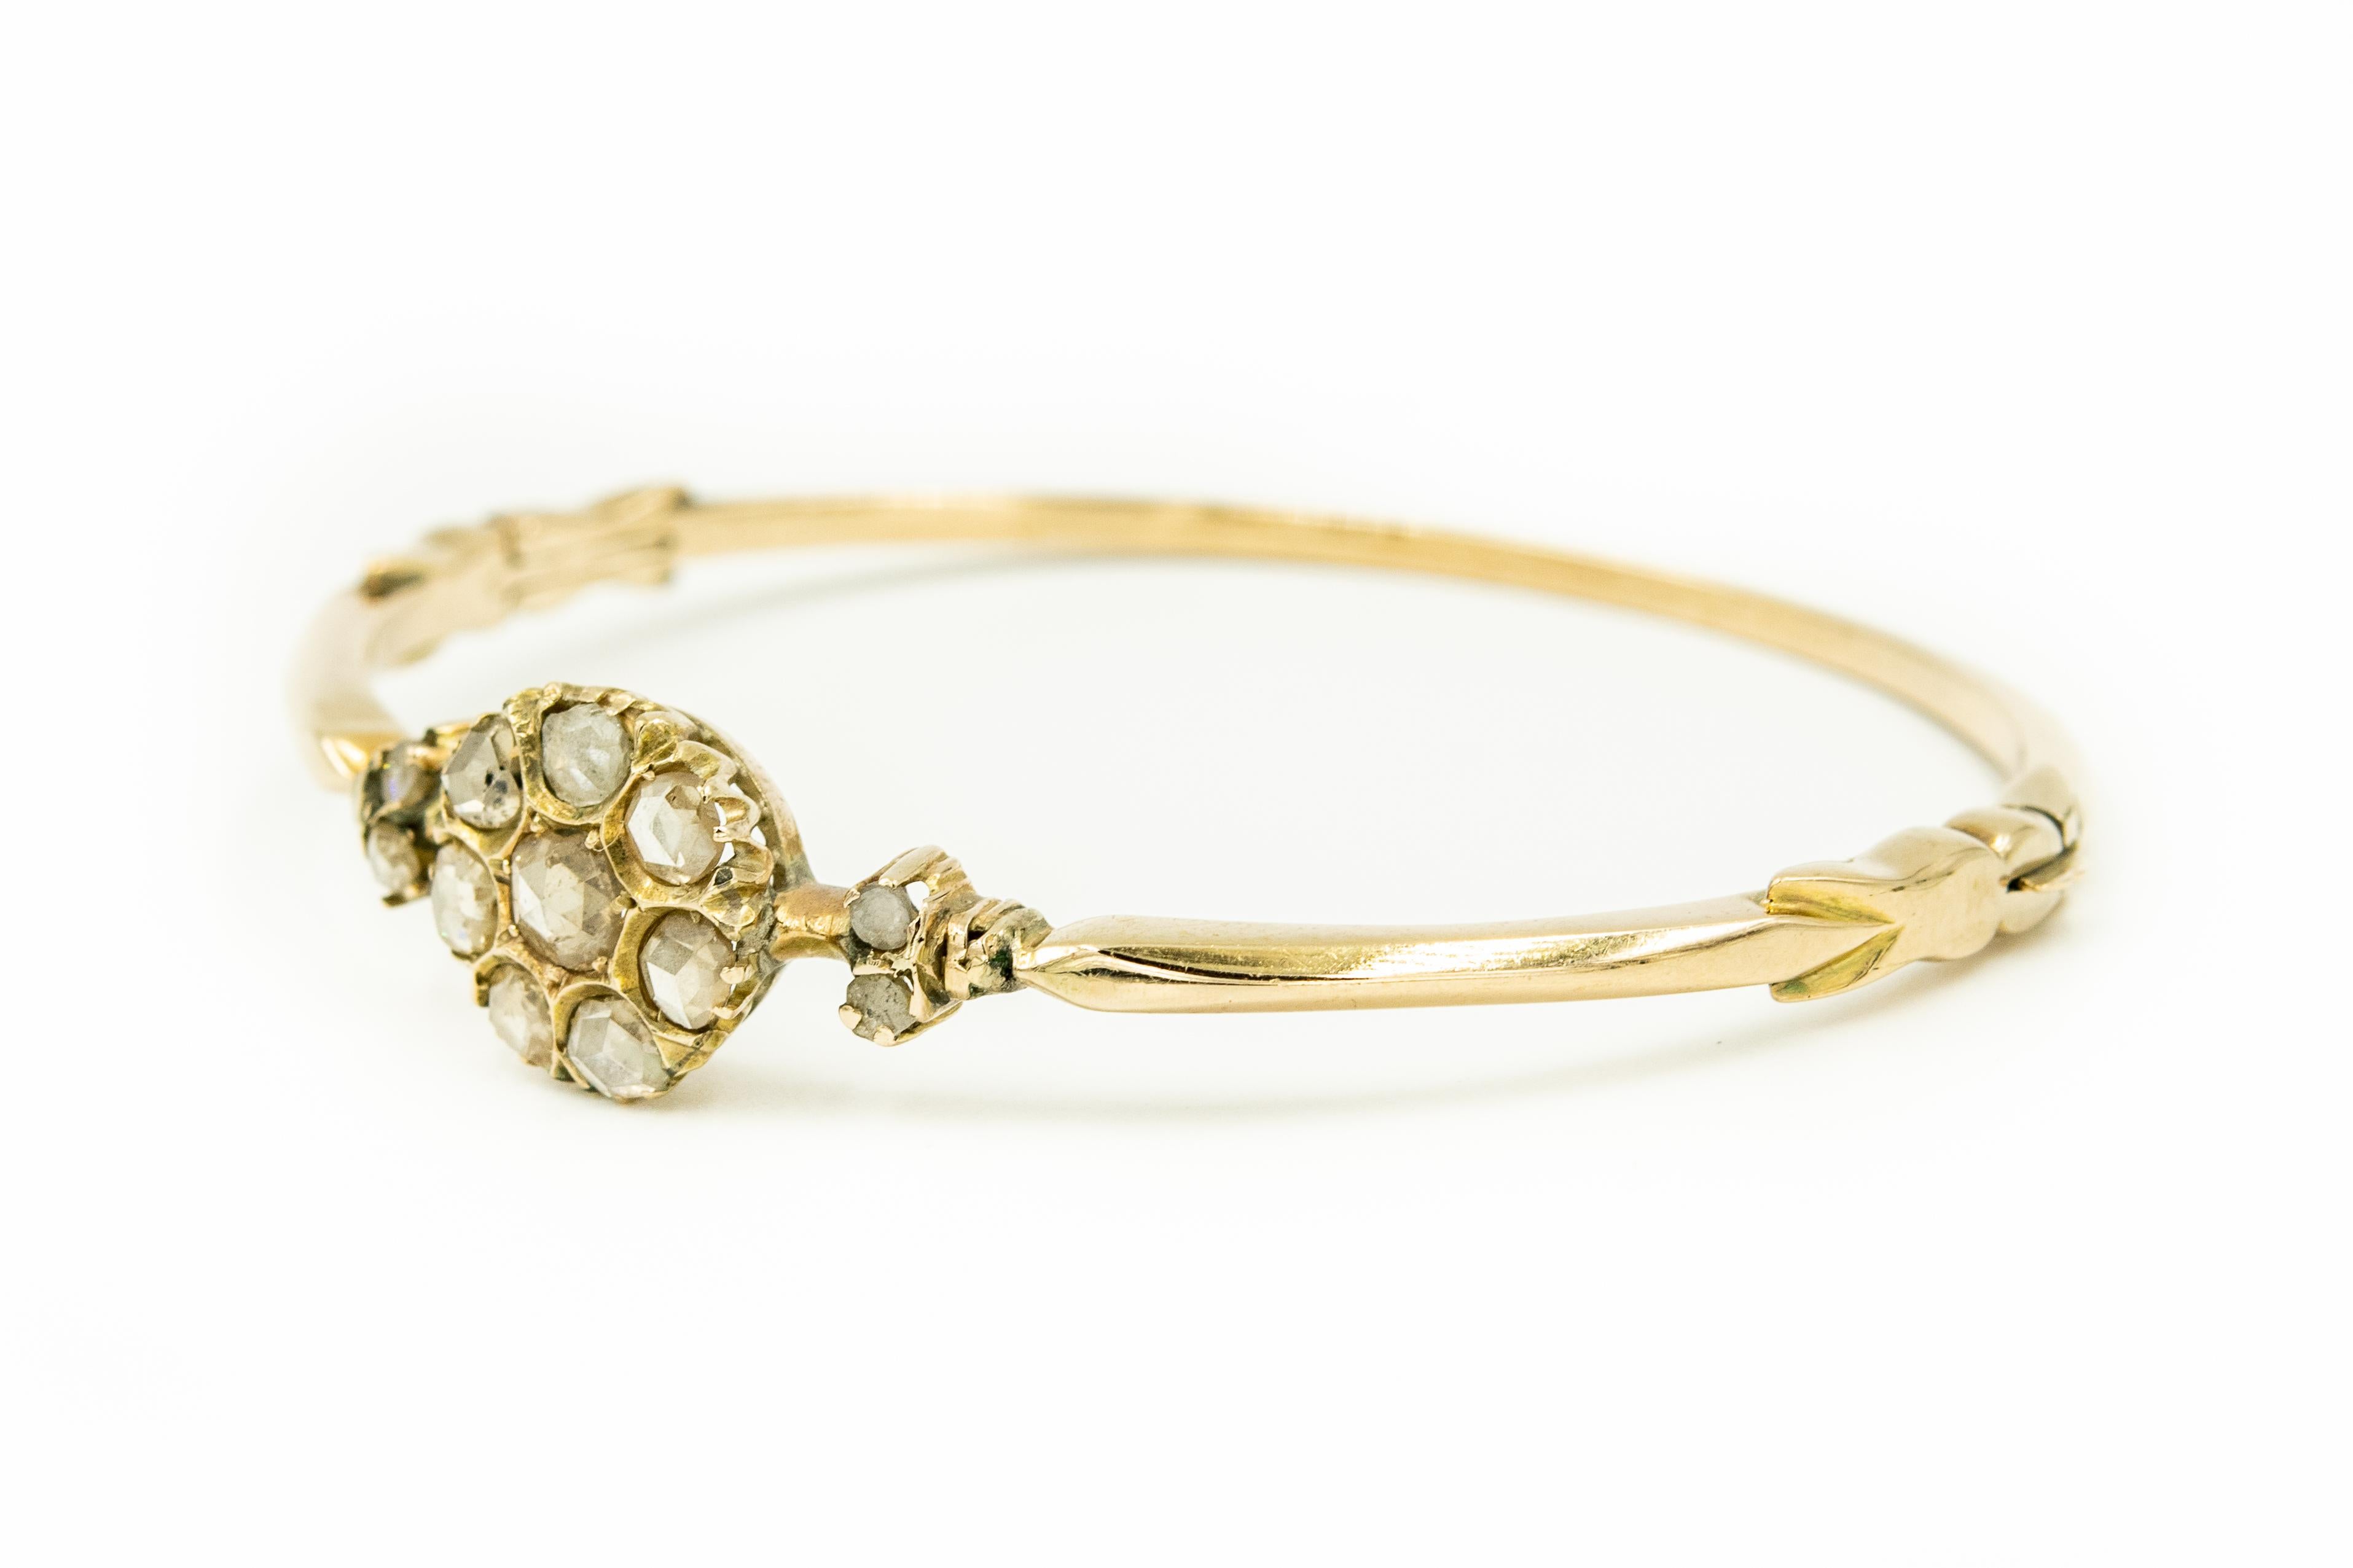 Antique Victorian 10k yellow gold bangle bracelet featuring a centrally set diamond flower with a 8 rose cut diamonds accented with a rose cut diamond leaf on either side.  The 10k yellow gold bracelet is a knife edge design.  It has a push button